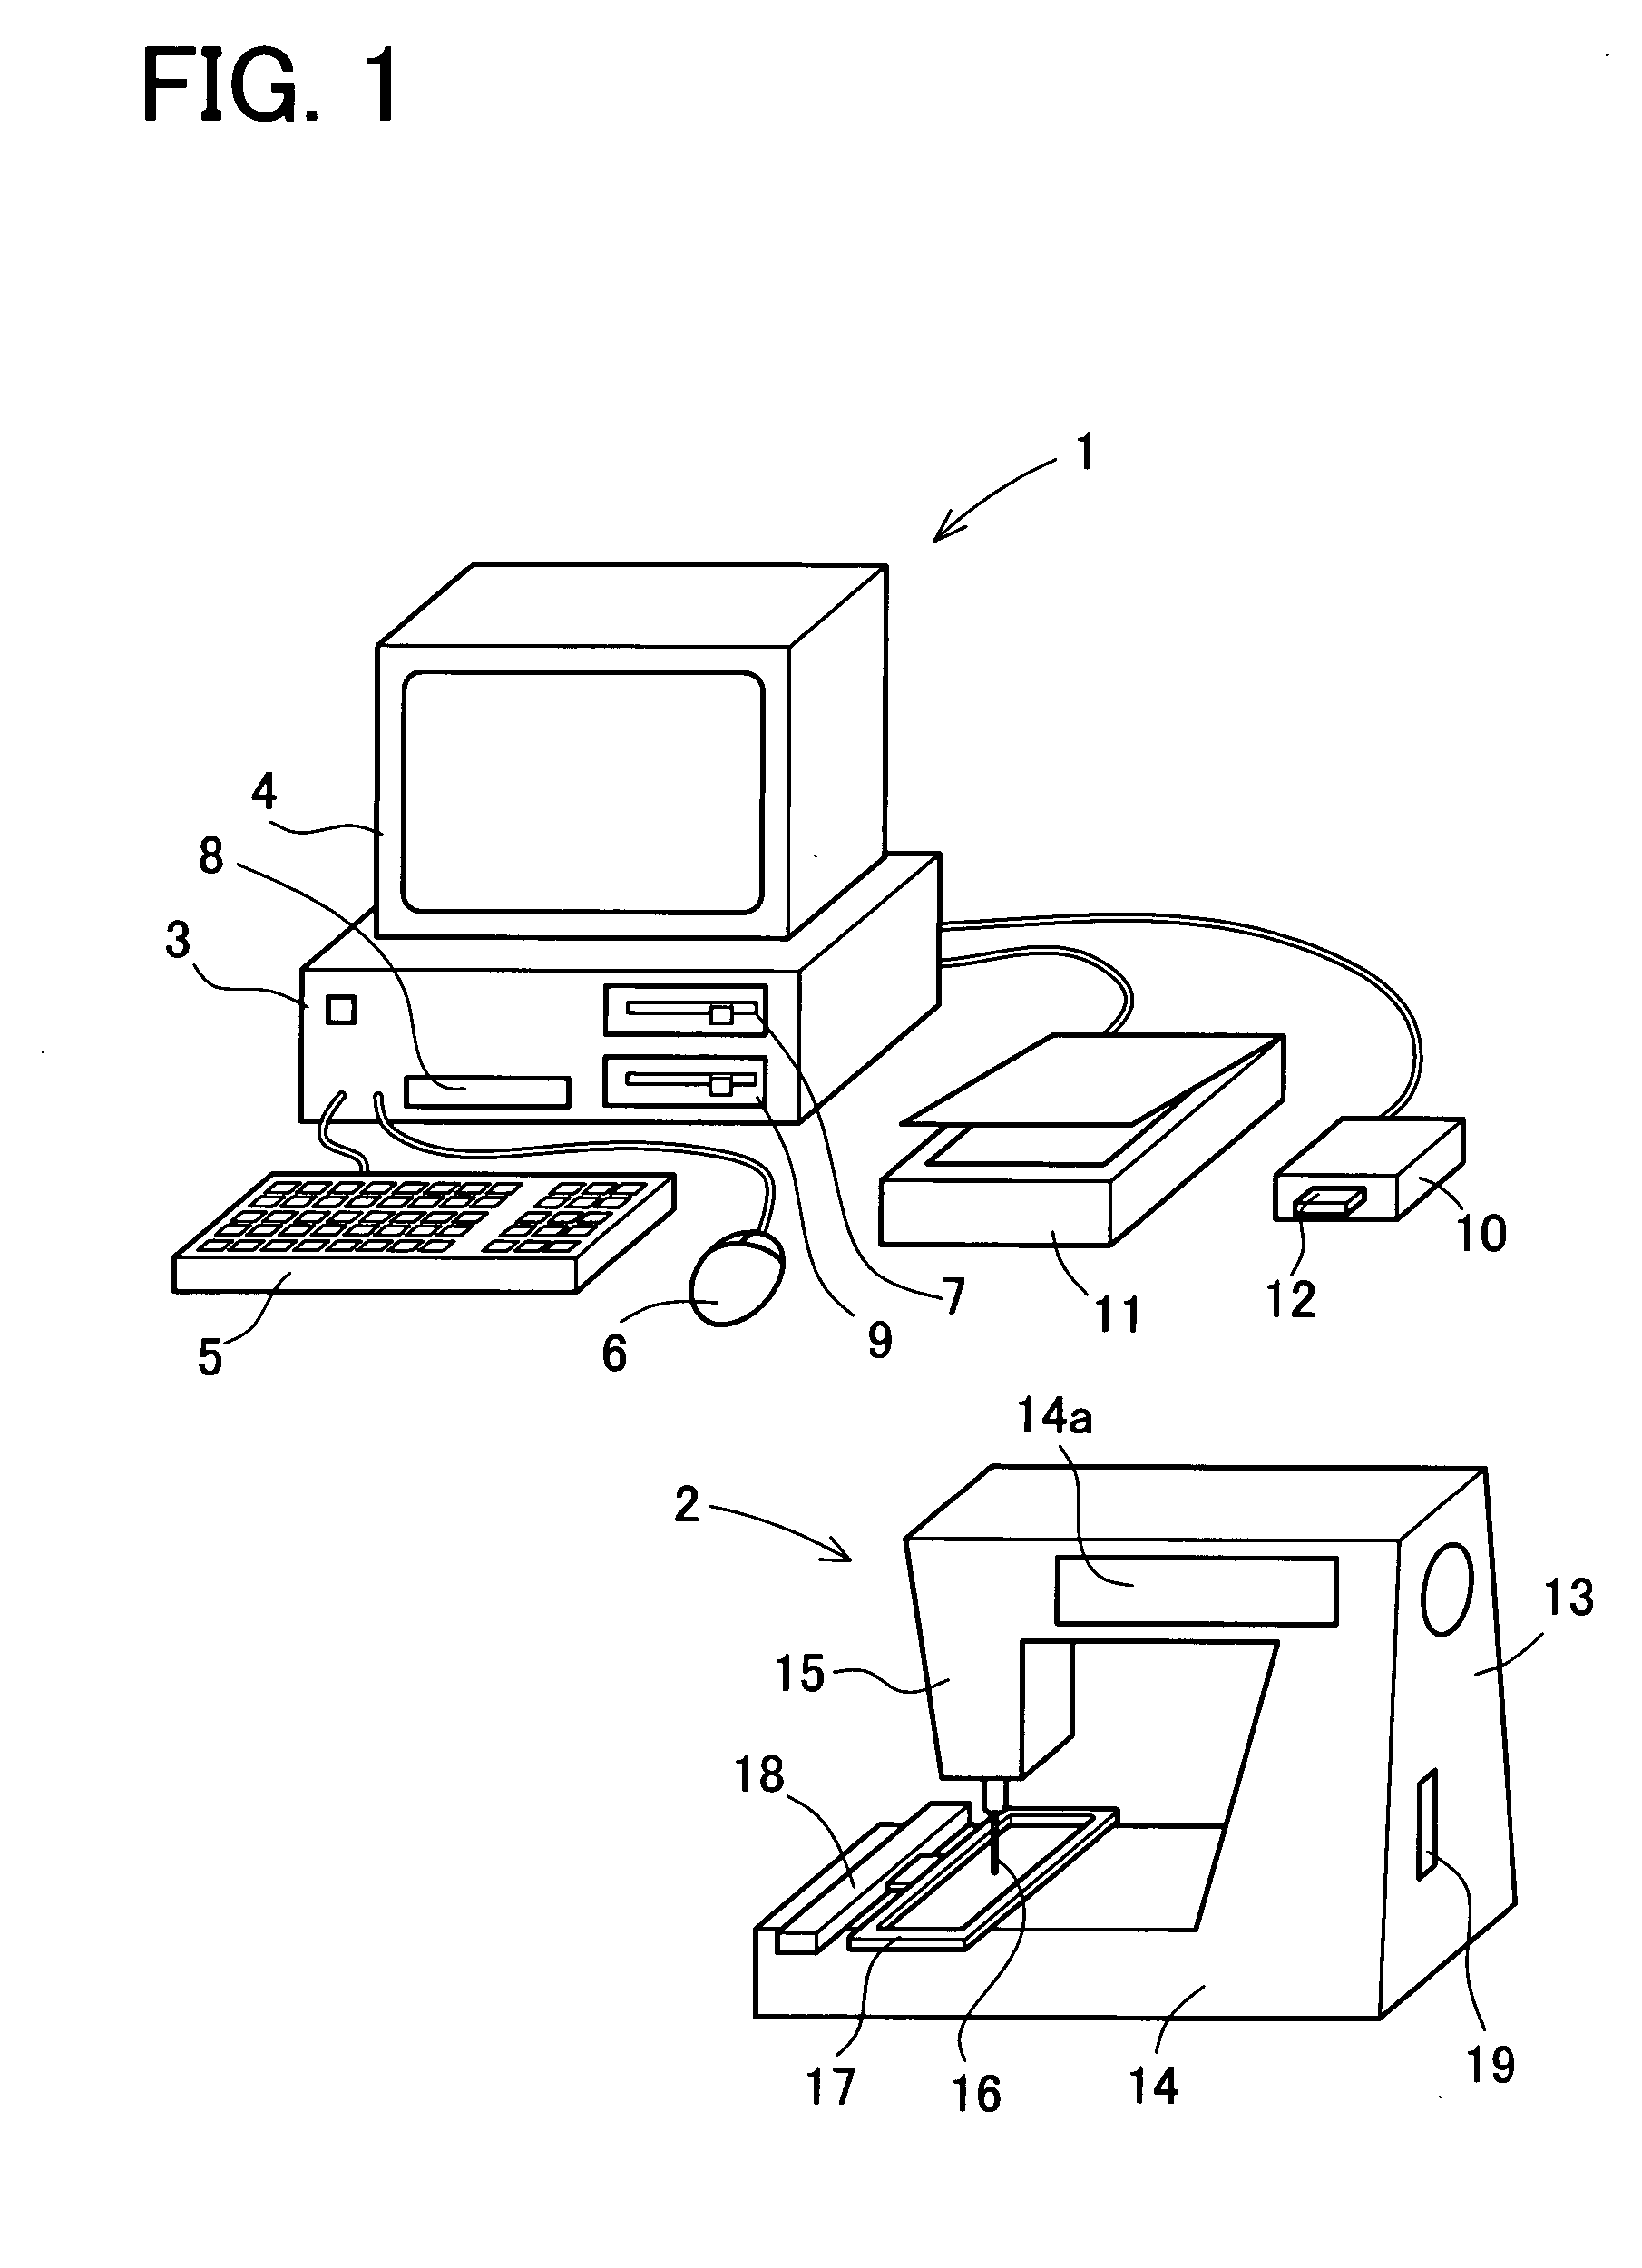 Apparatus and program stored on a computer readable medium for processing embroidery data